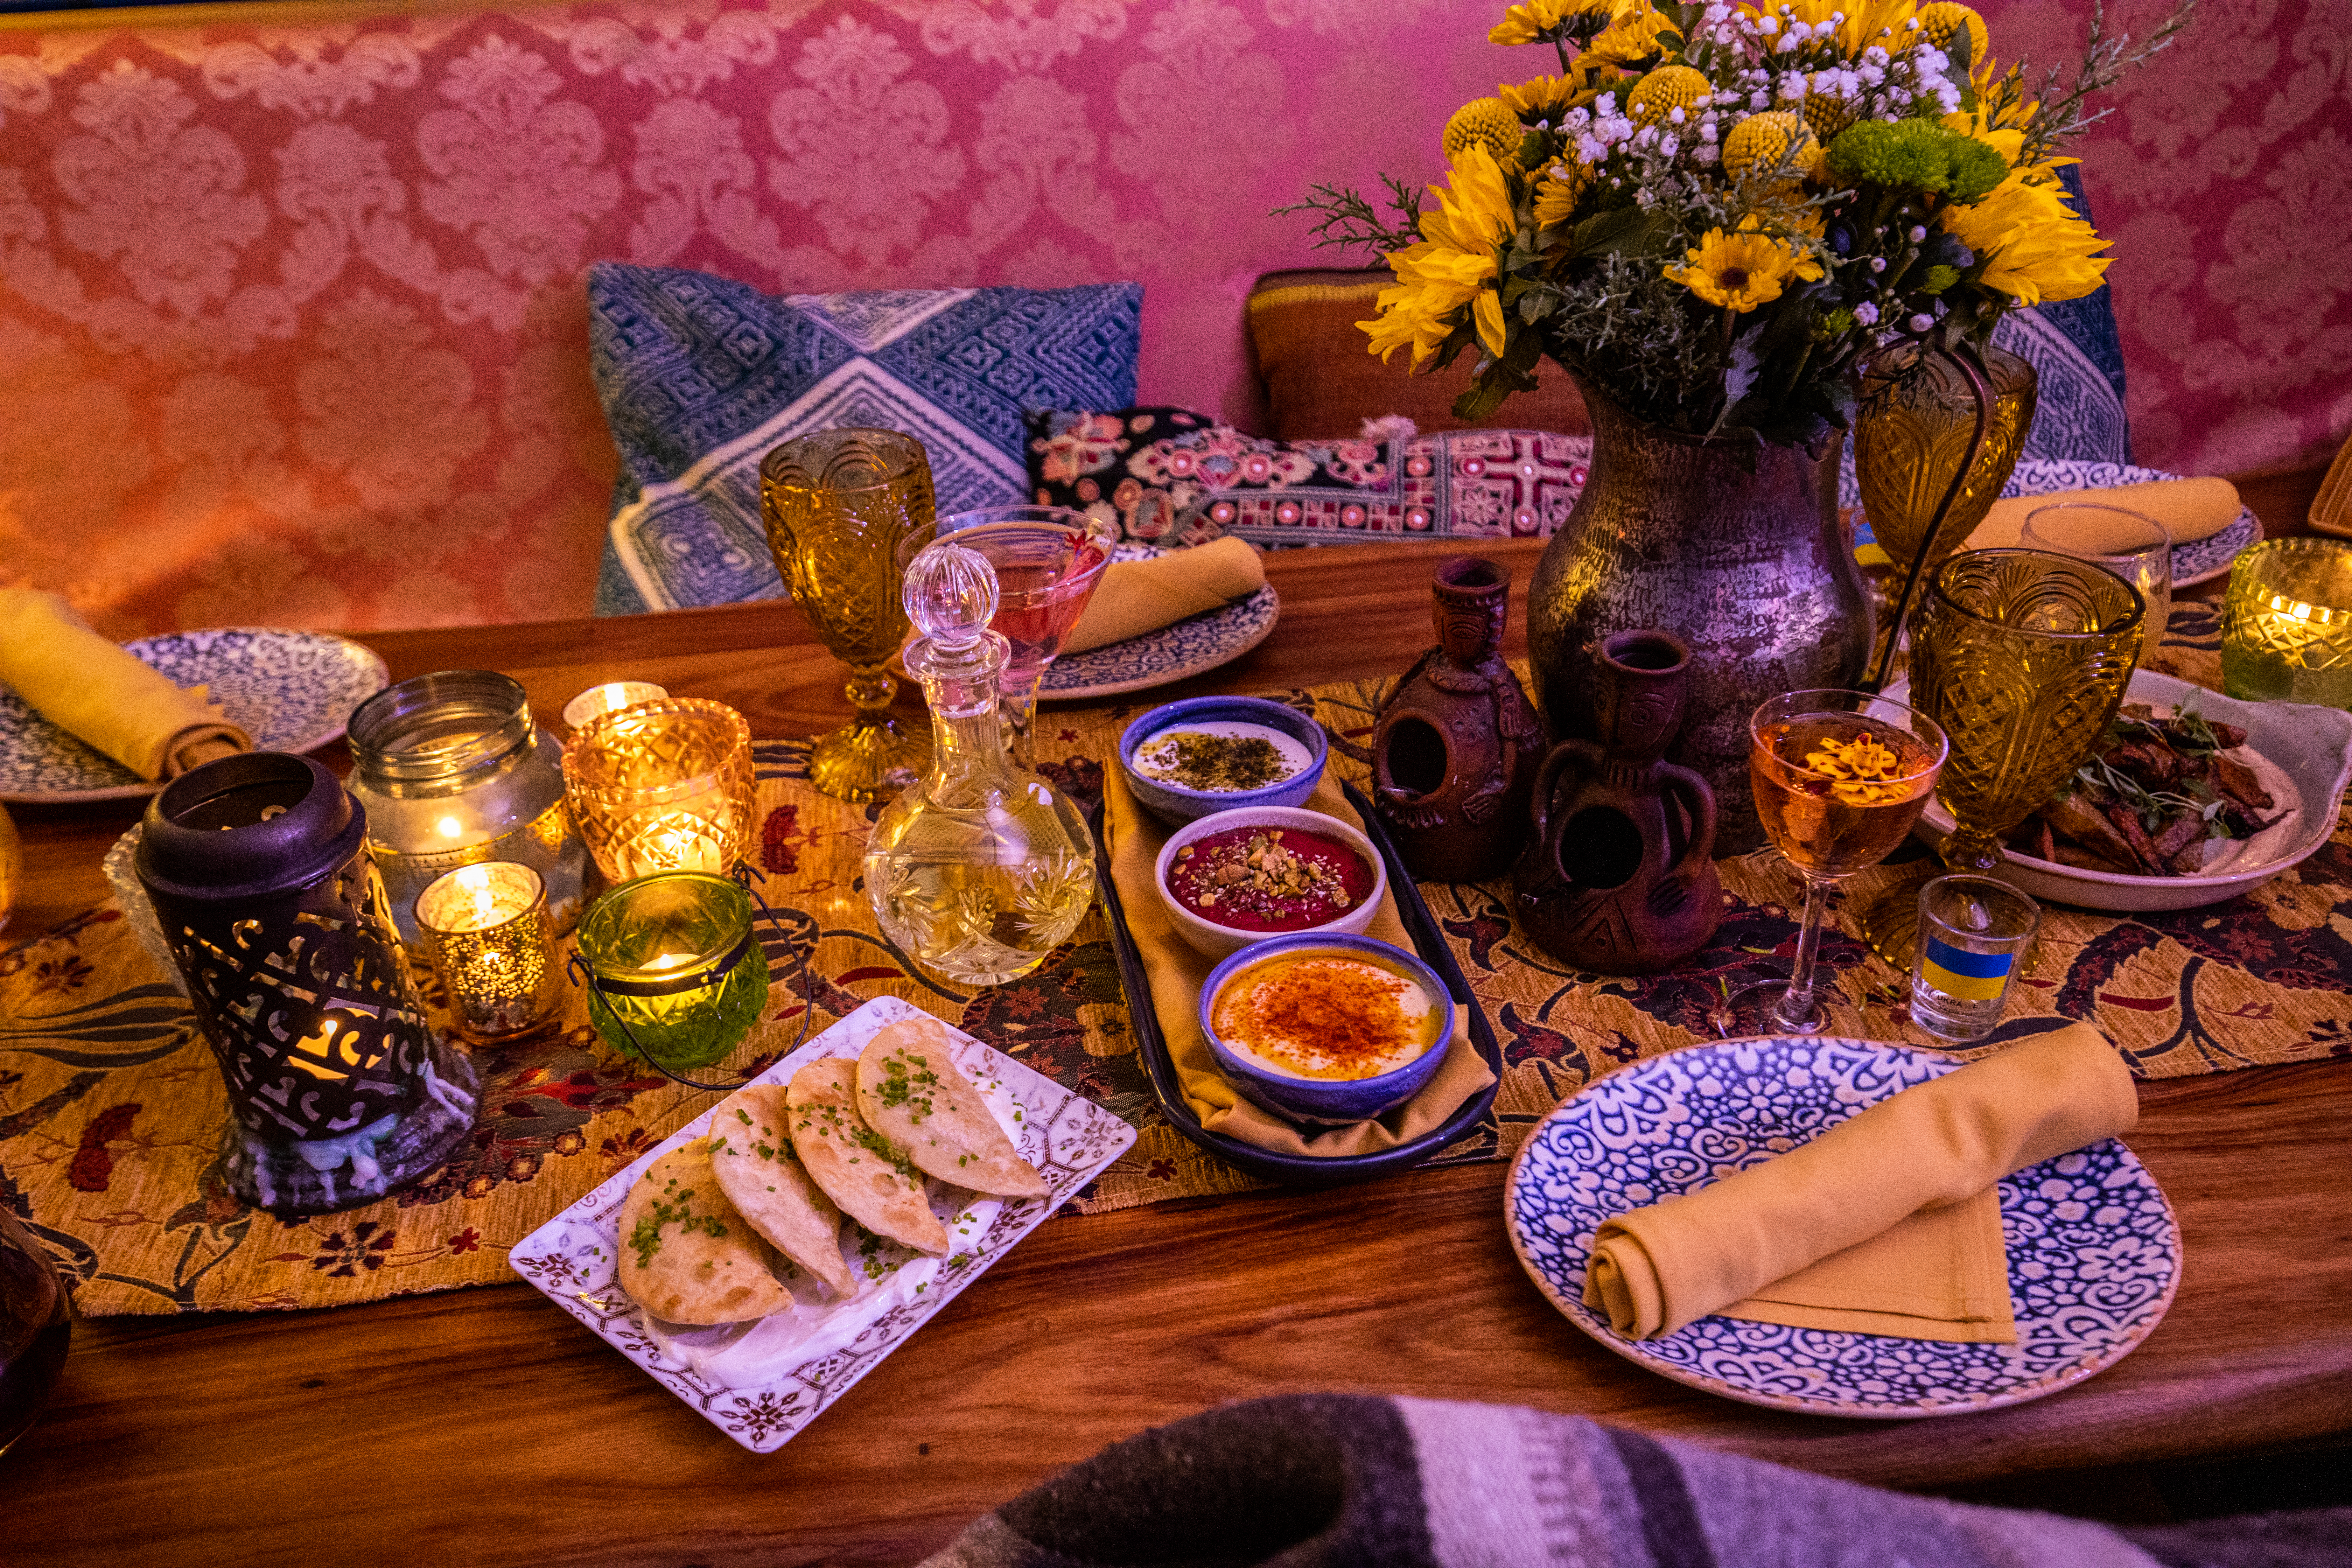 A spread of food on colorful plates on a wooden table